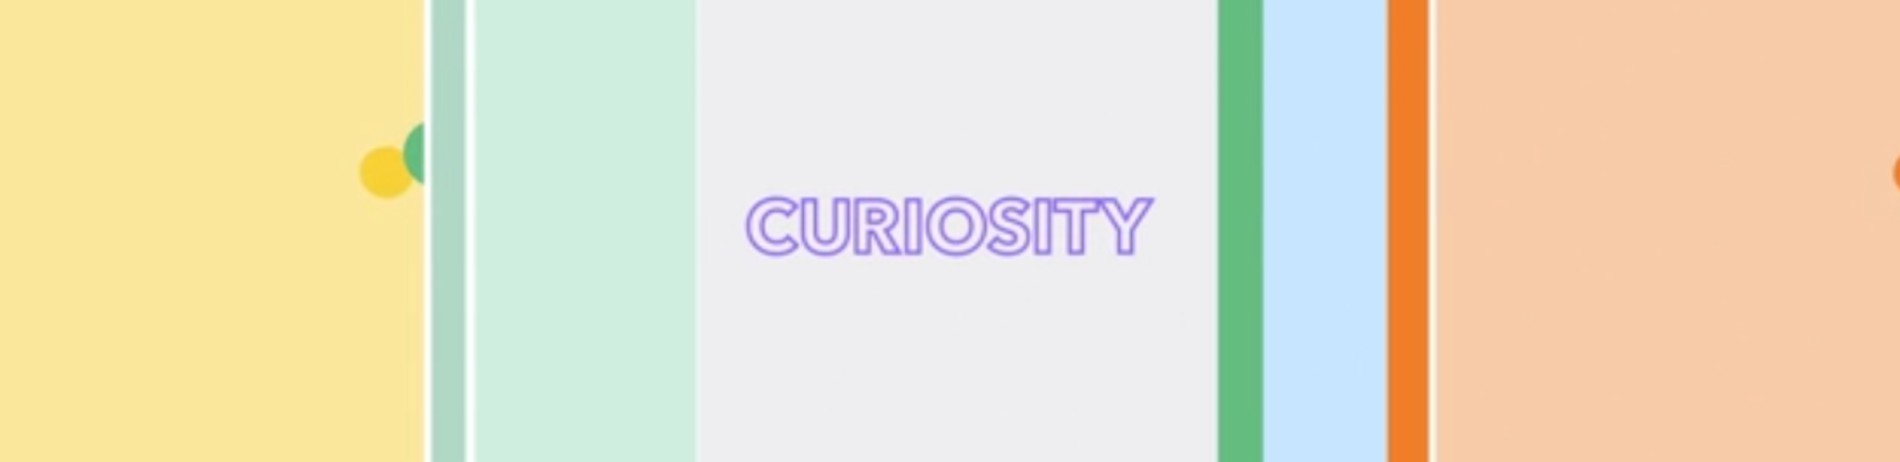 Amid the Great Resignation, Curiosity is an Increasingly Important Skill for Employees, According to New SAS Study